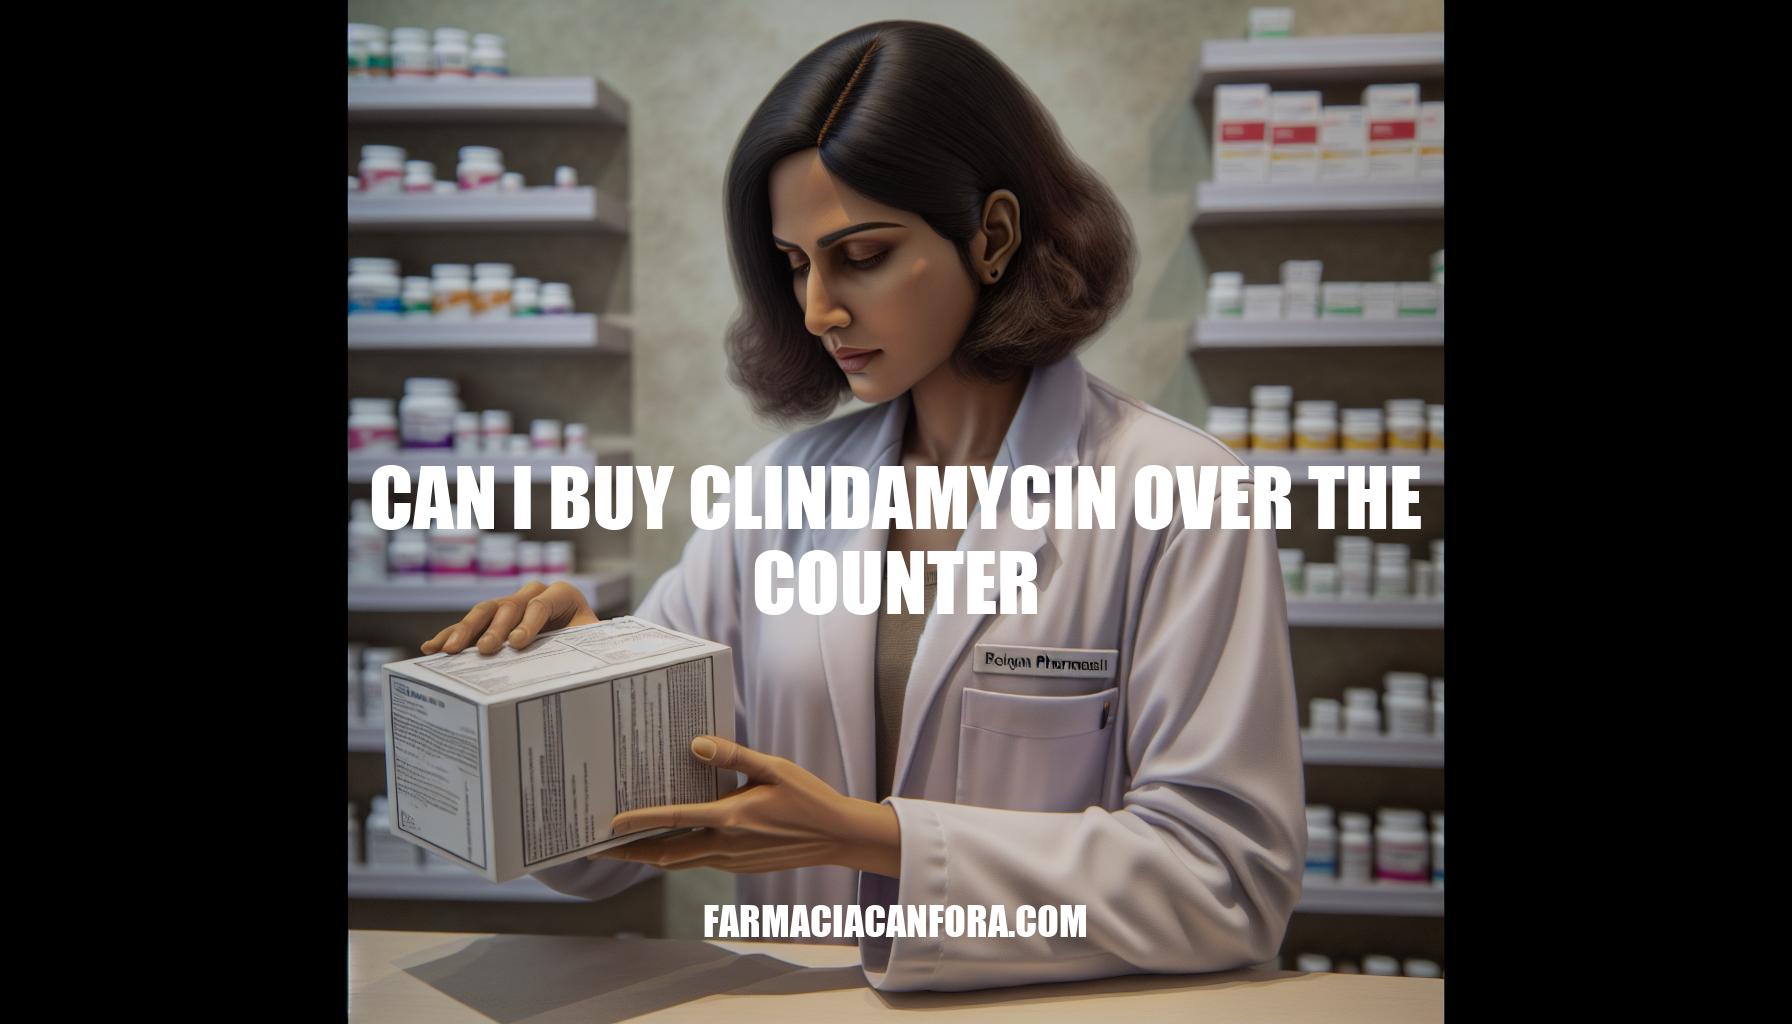 Can I Buy Clindamycin Over the Counter: Regulations and Risks